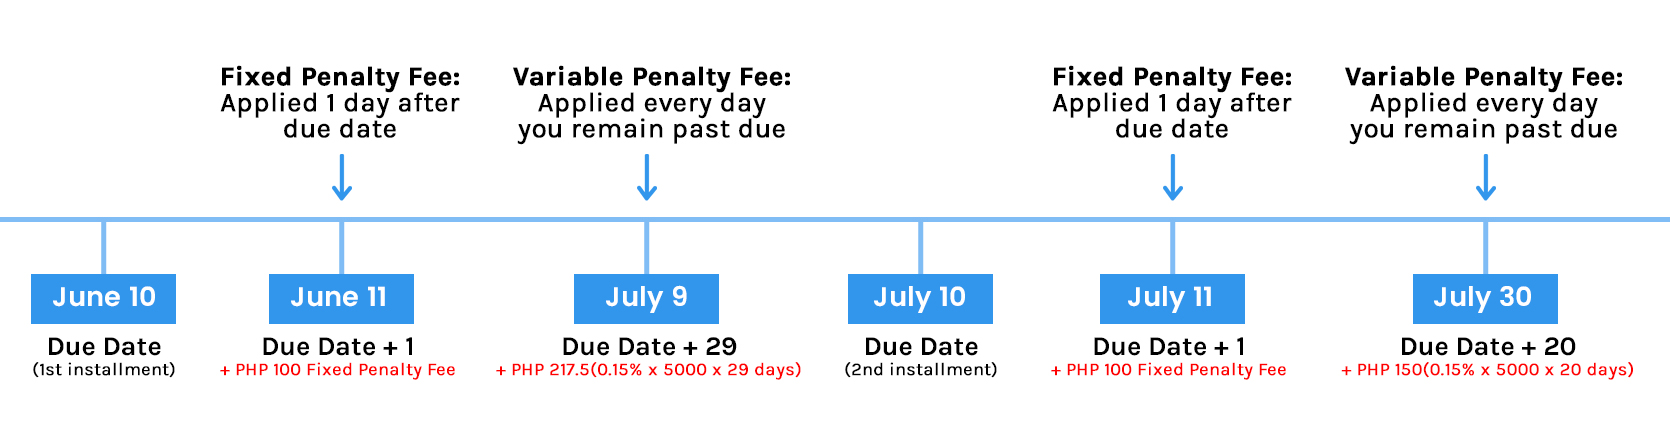 When_are_penalty_fees_applied.jpg